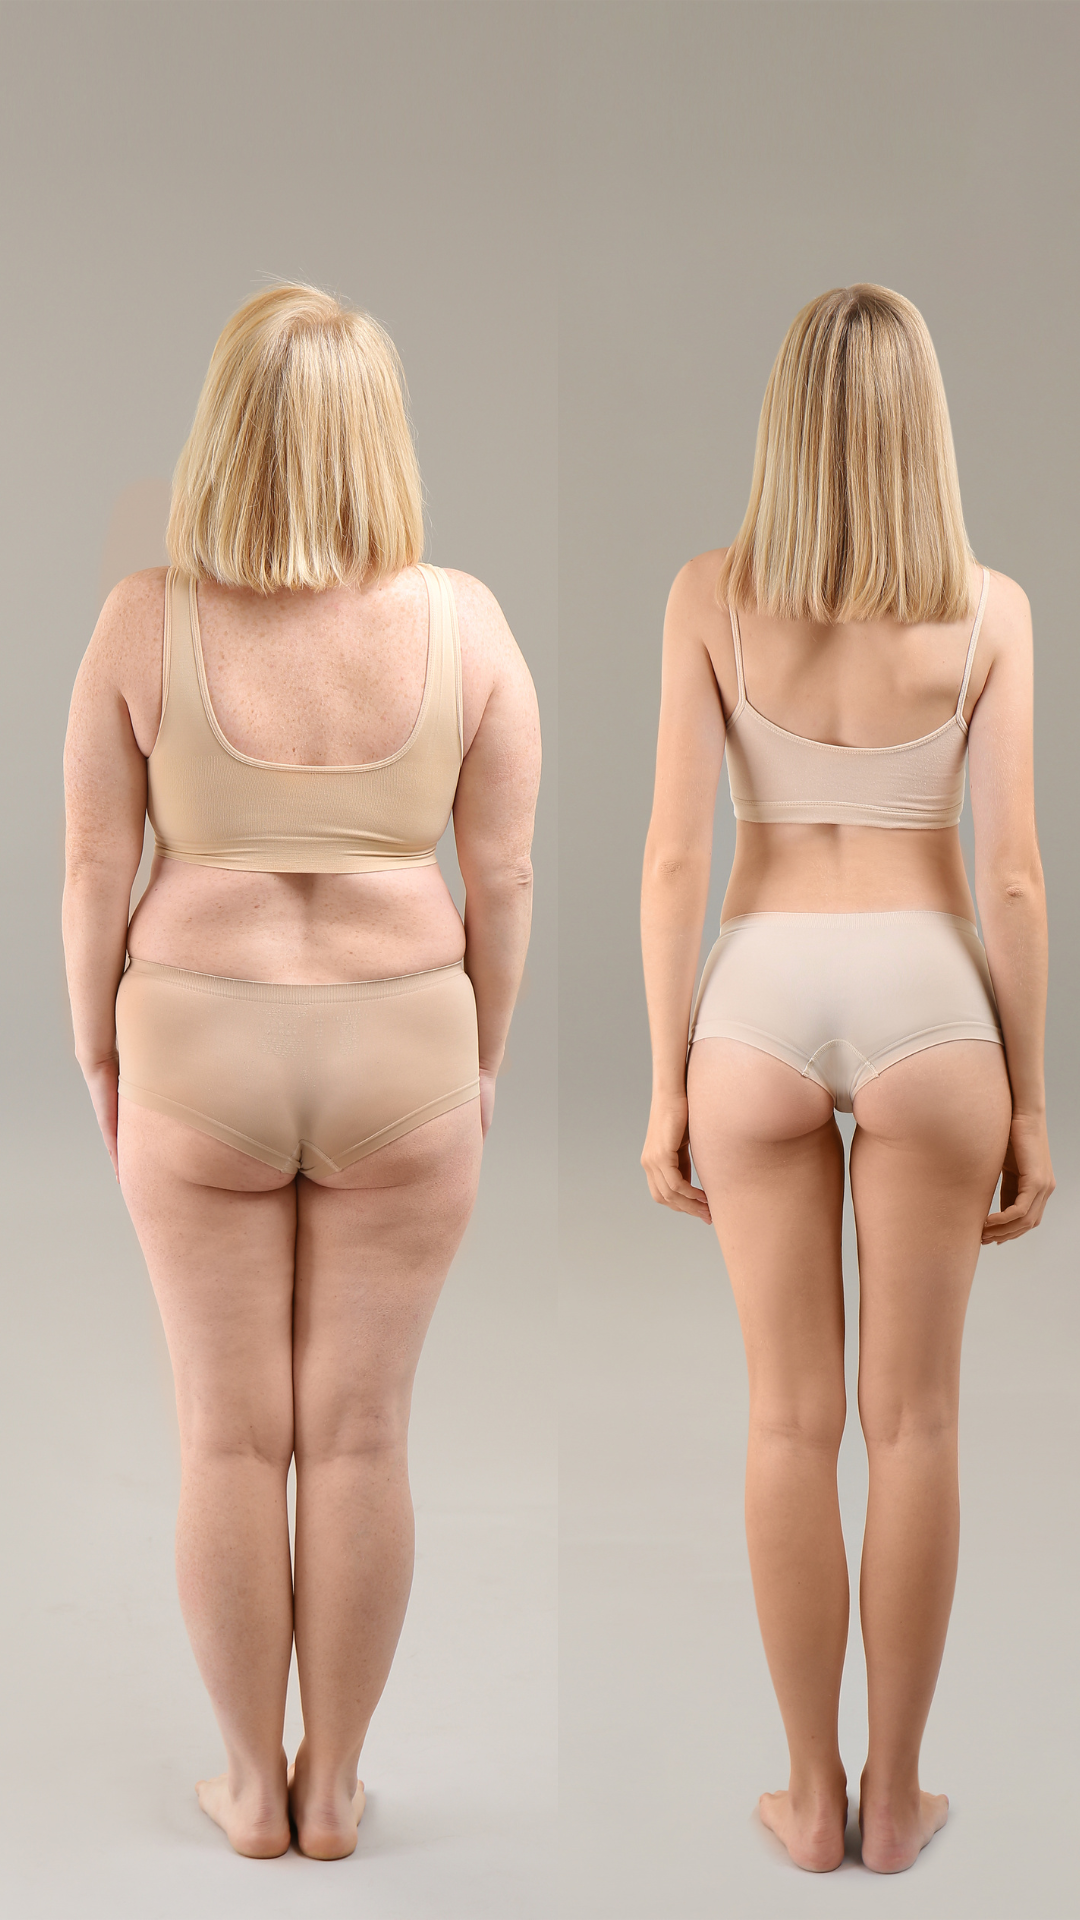 Recovery After Liposuction: Procedure, Timeline, and More